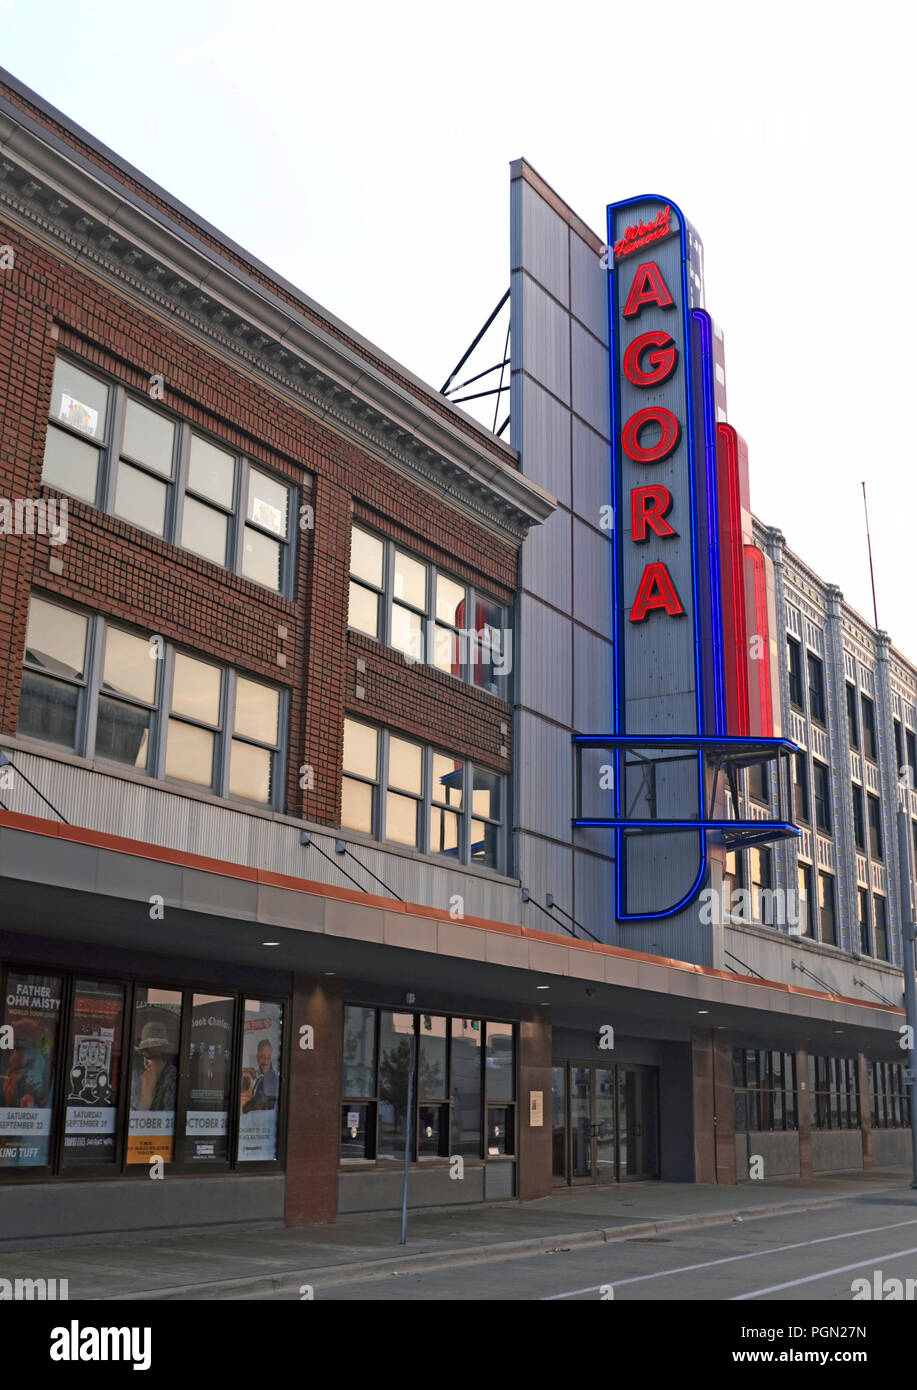 The refurbished Agora Theatre and Ballroom on Euclid Avenue in Cleveland, Ohio, USA is known for its concert hall hosting touring rock bands. Stock Photo